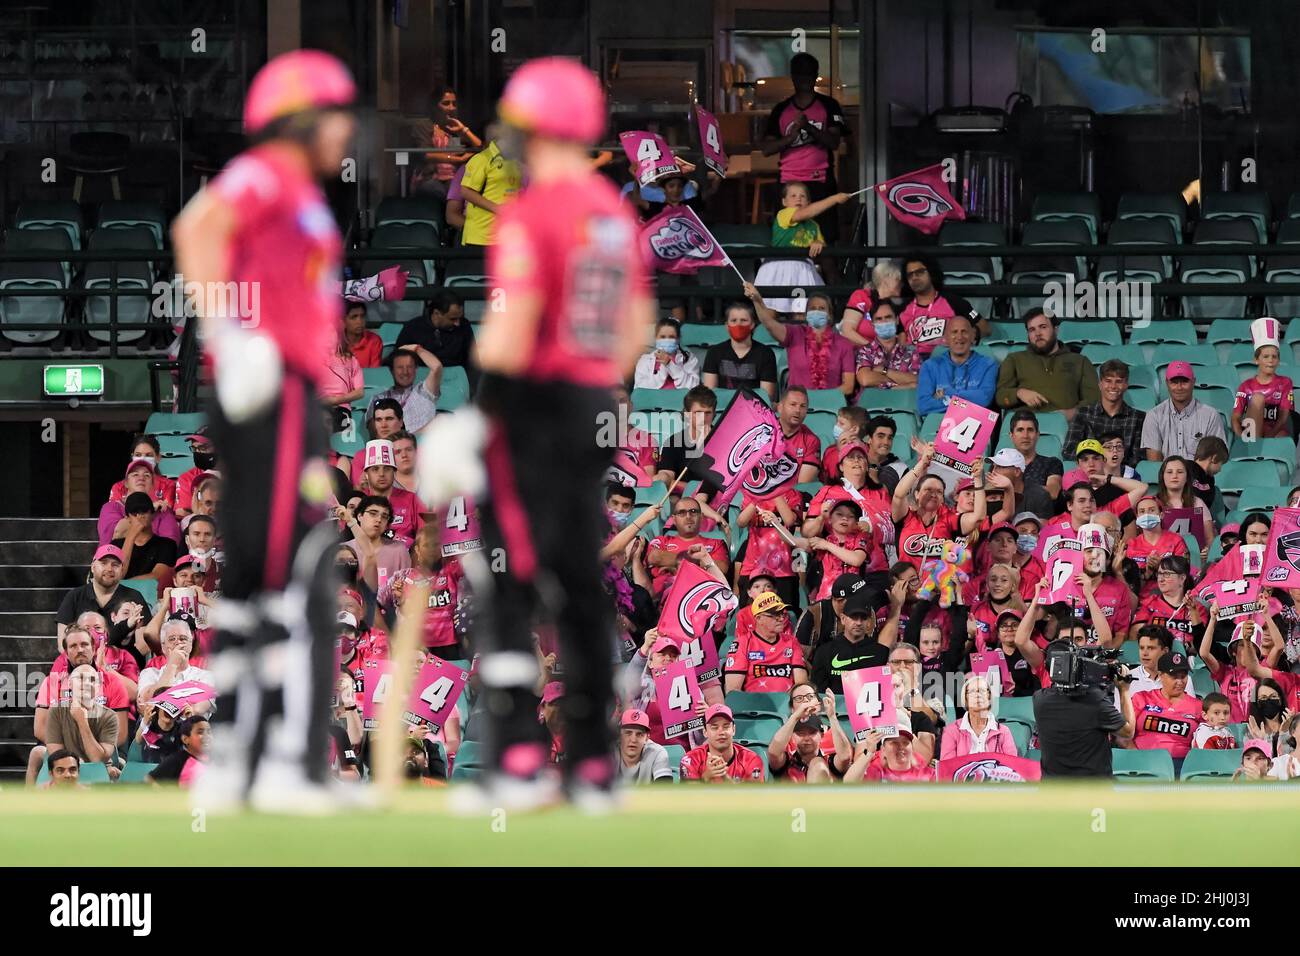 Sydney, Australia, 26 January, 2022. Sydney fans cheer during the Big Bash League Challenger cricket match between Sydney Sixers and Adelaide Strikers at The Sydney Cricket Ground on January 26, 2022 in Sydney, Australia. Credit: Steven Markham/Speed Media/Alamy Live News Stock Photo